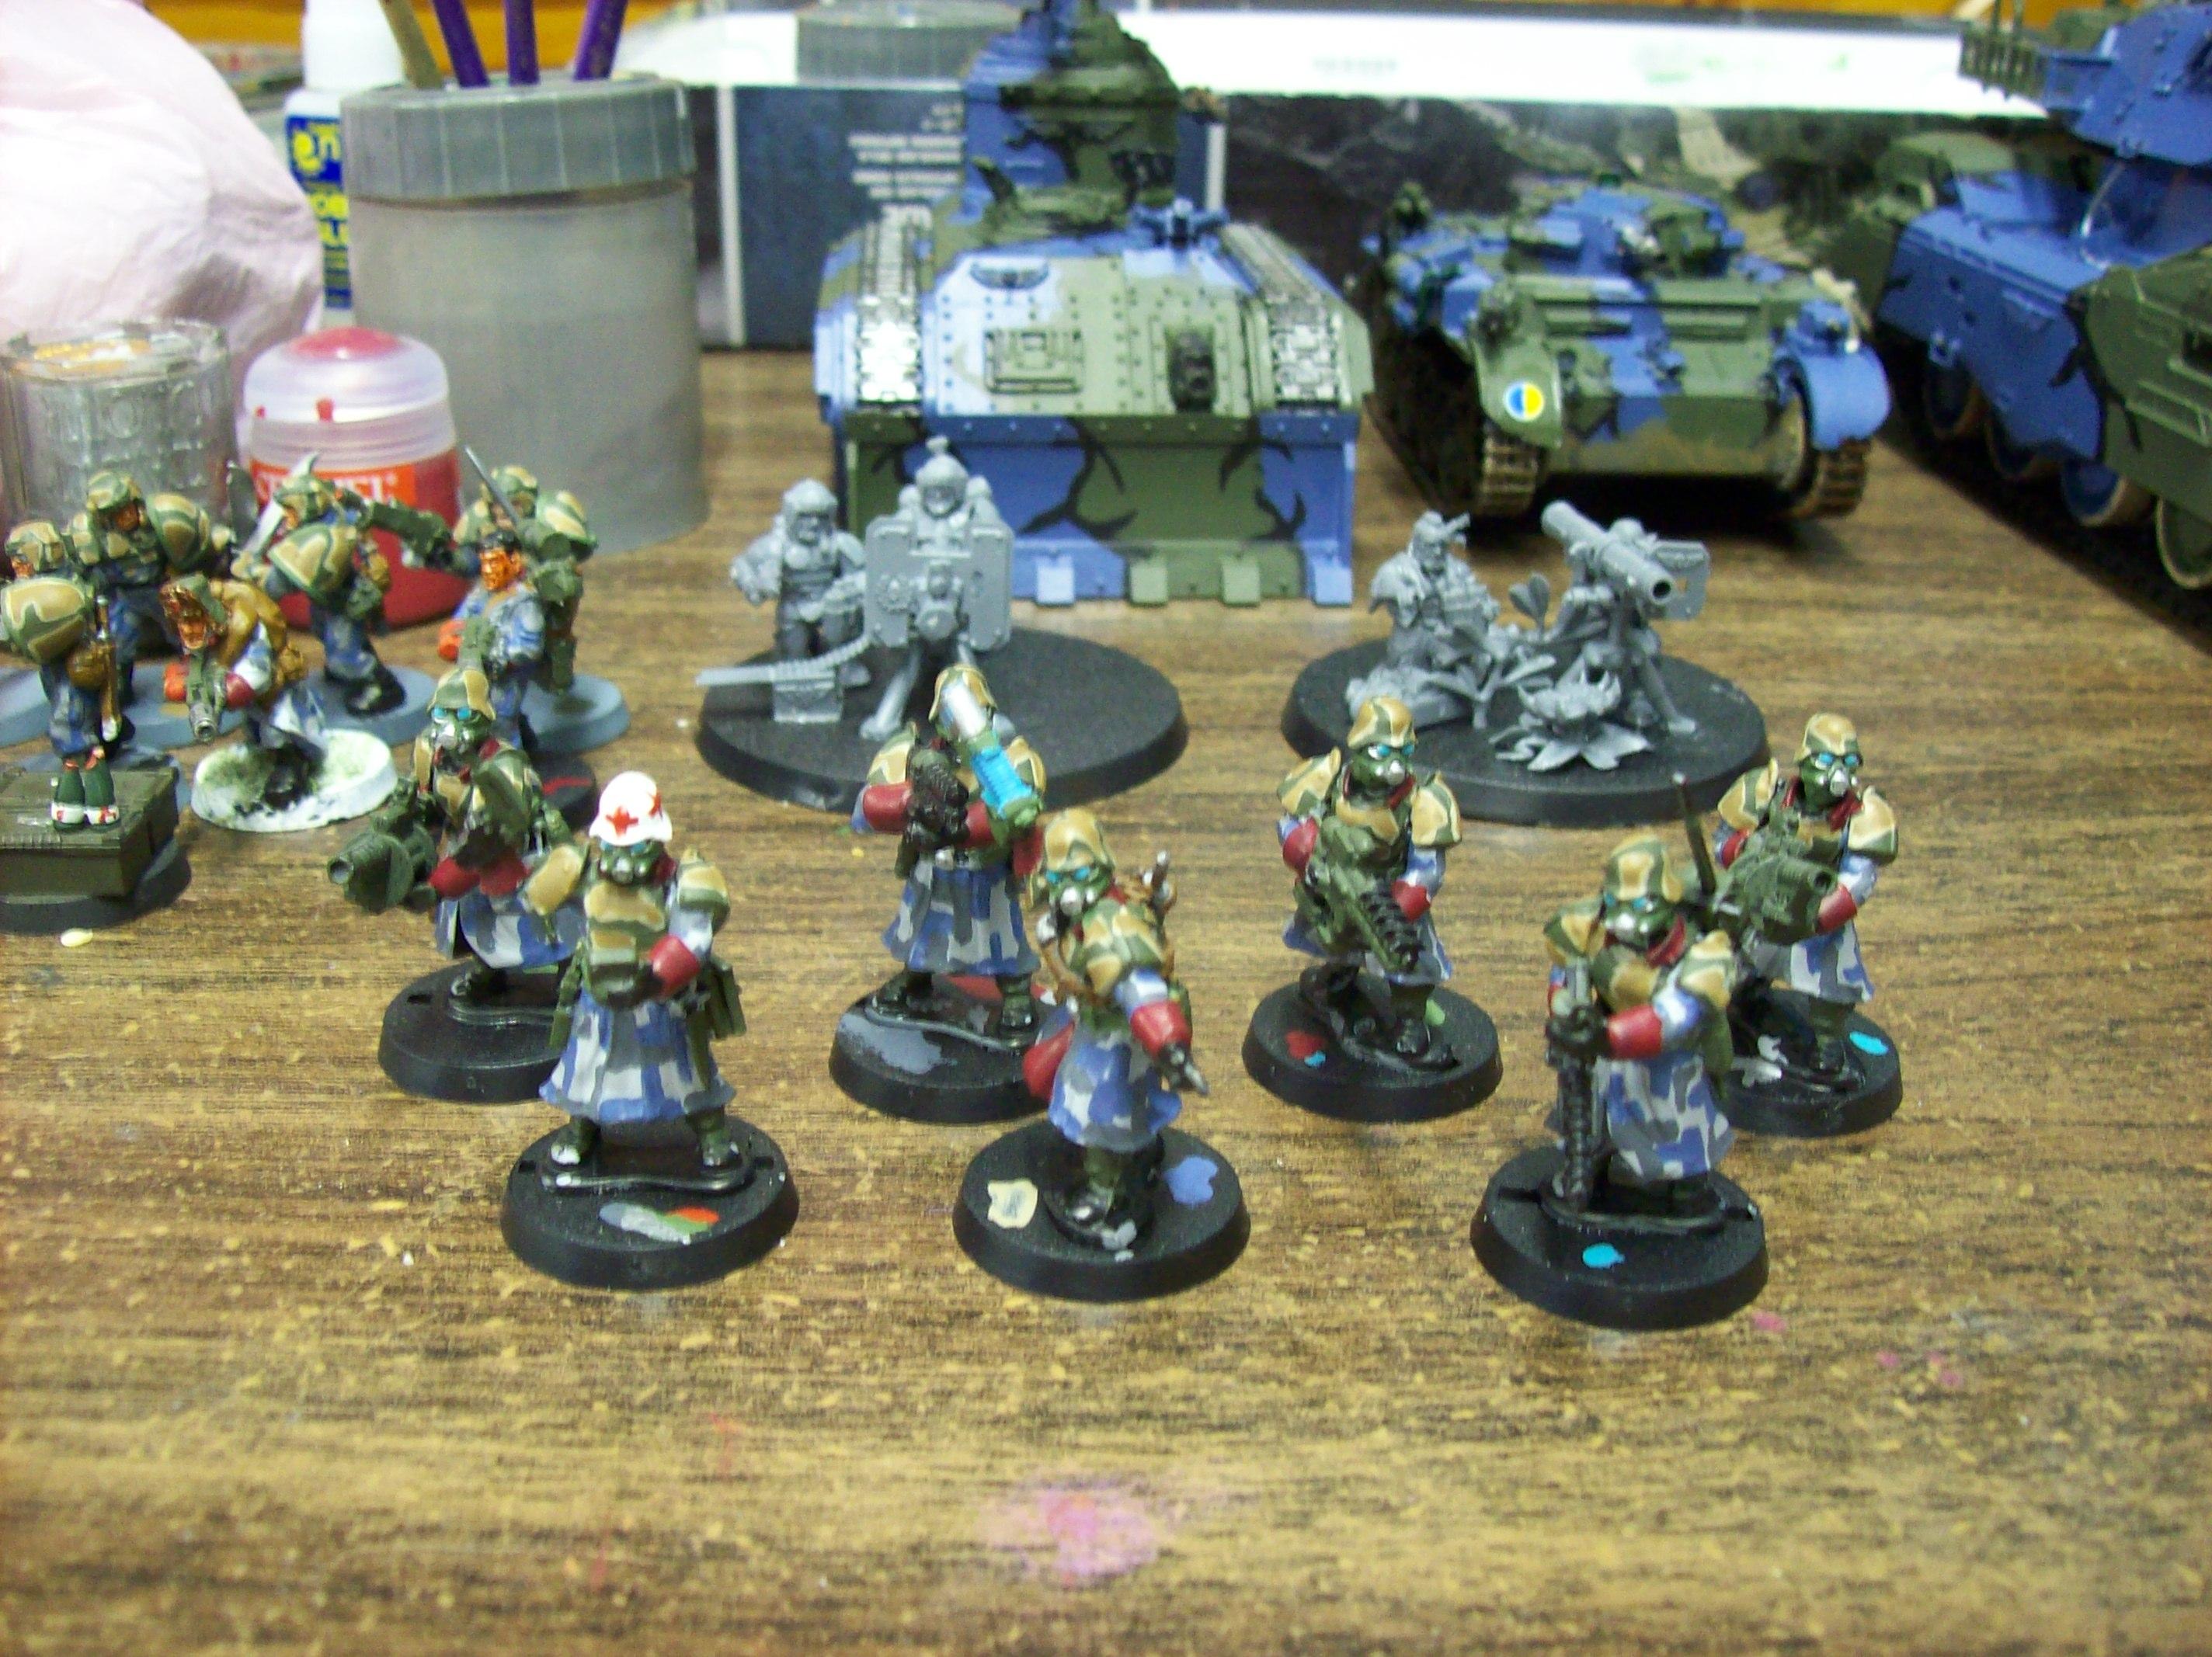 Above, Camouflage, Conversion, Imperial Guard, Infantry